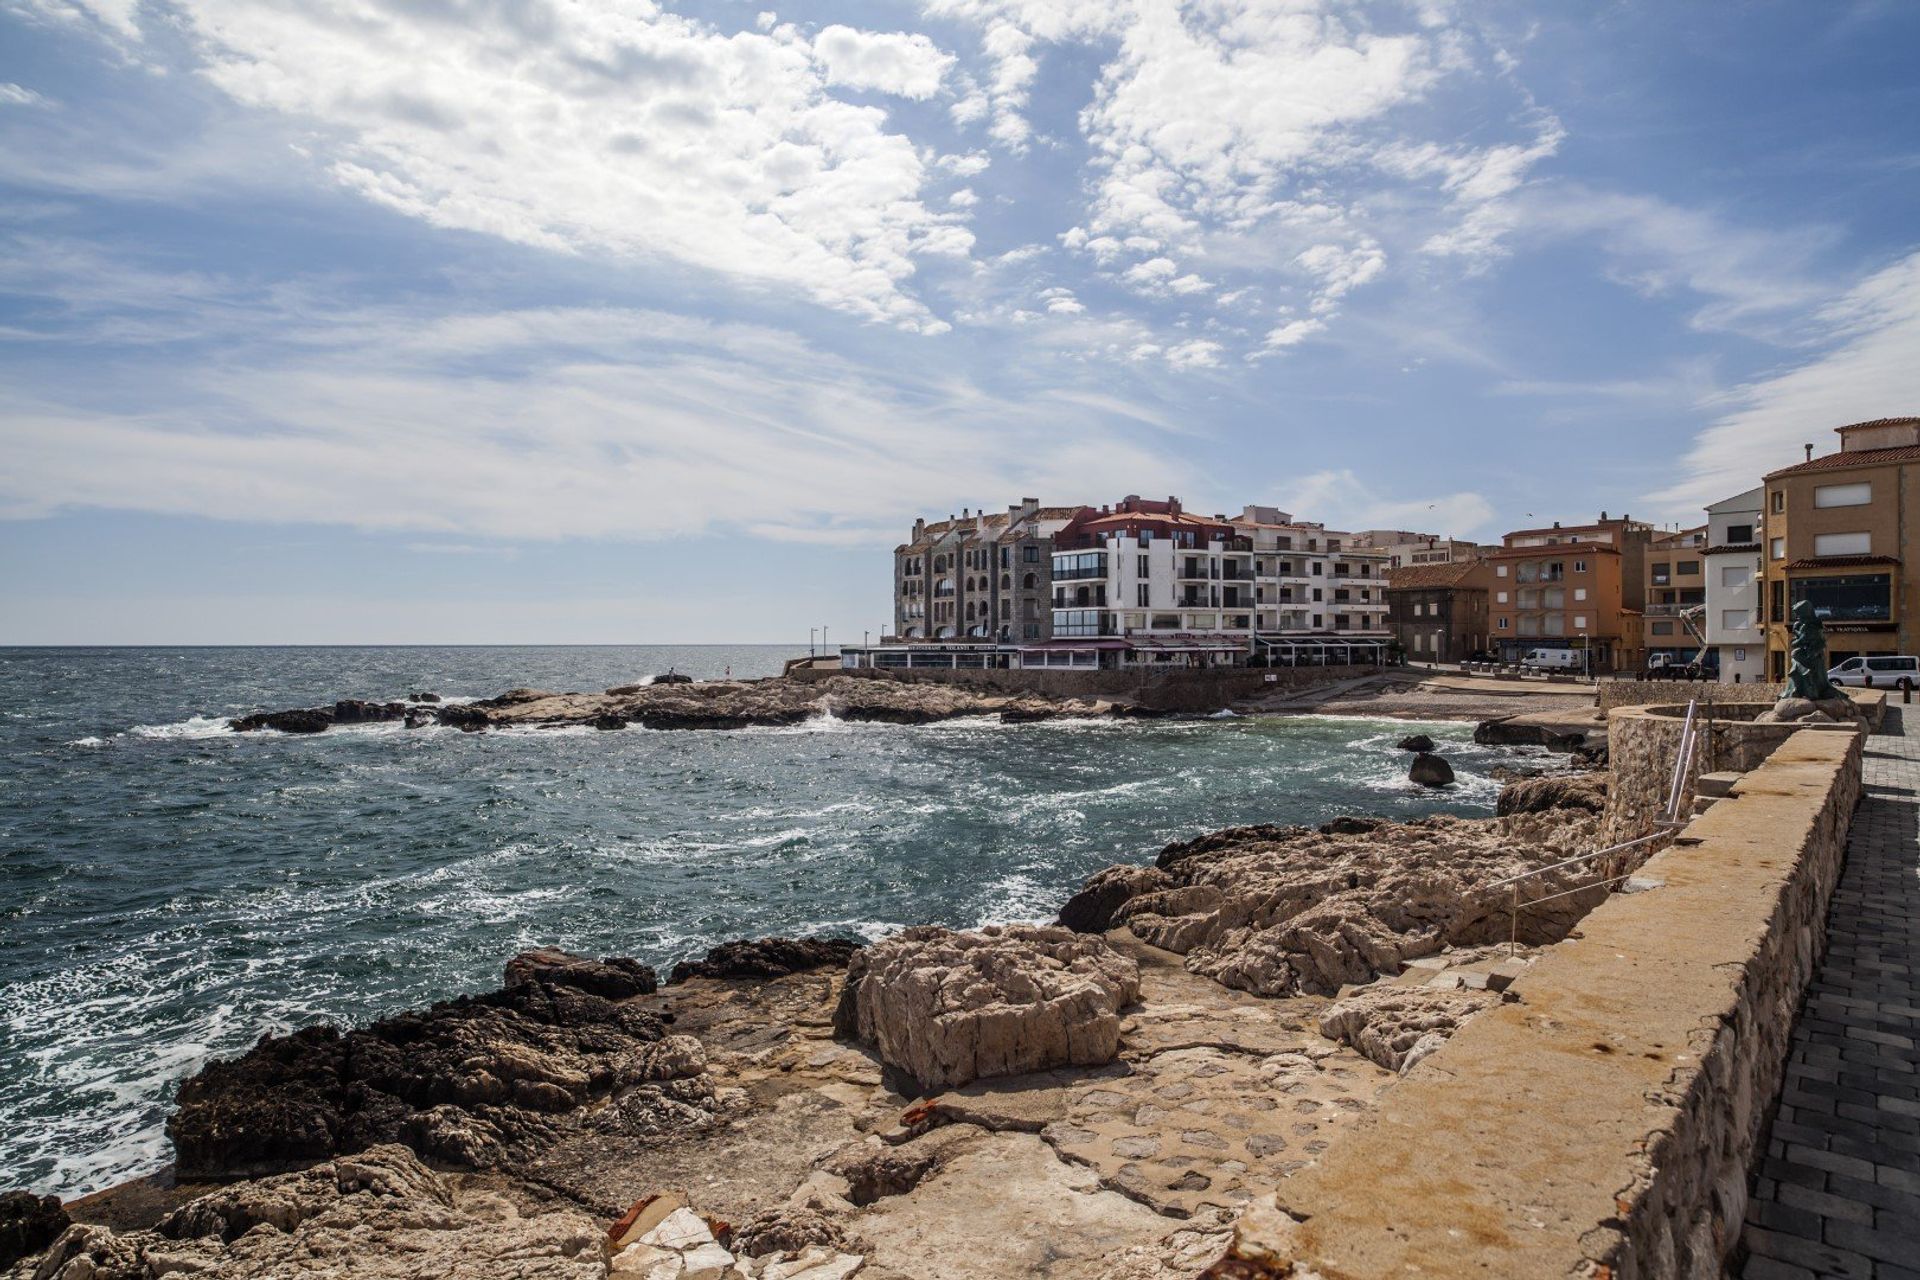 After a long day on the beach, cool off with a relaxing stroll down L'Escala's beach promenade